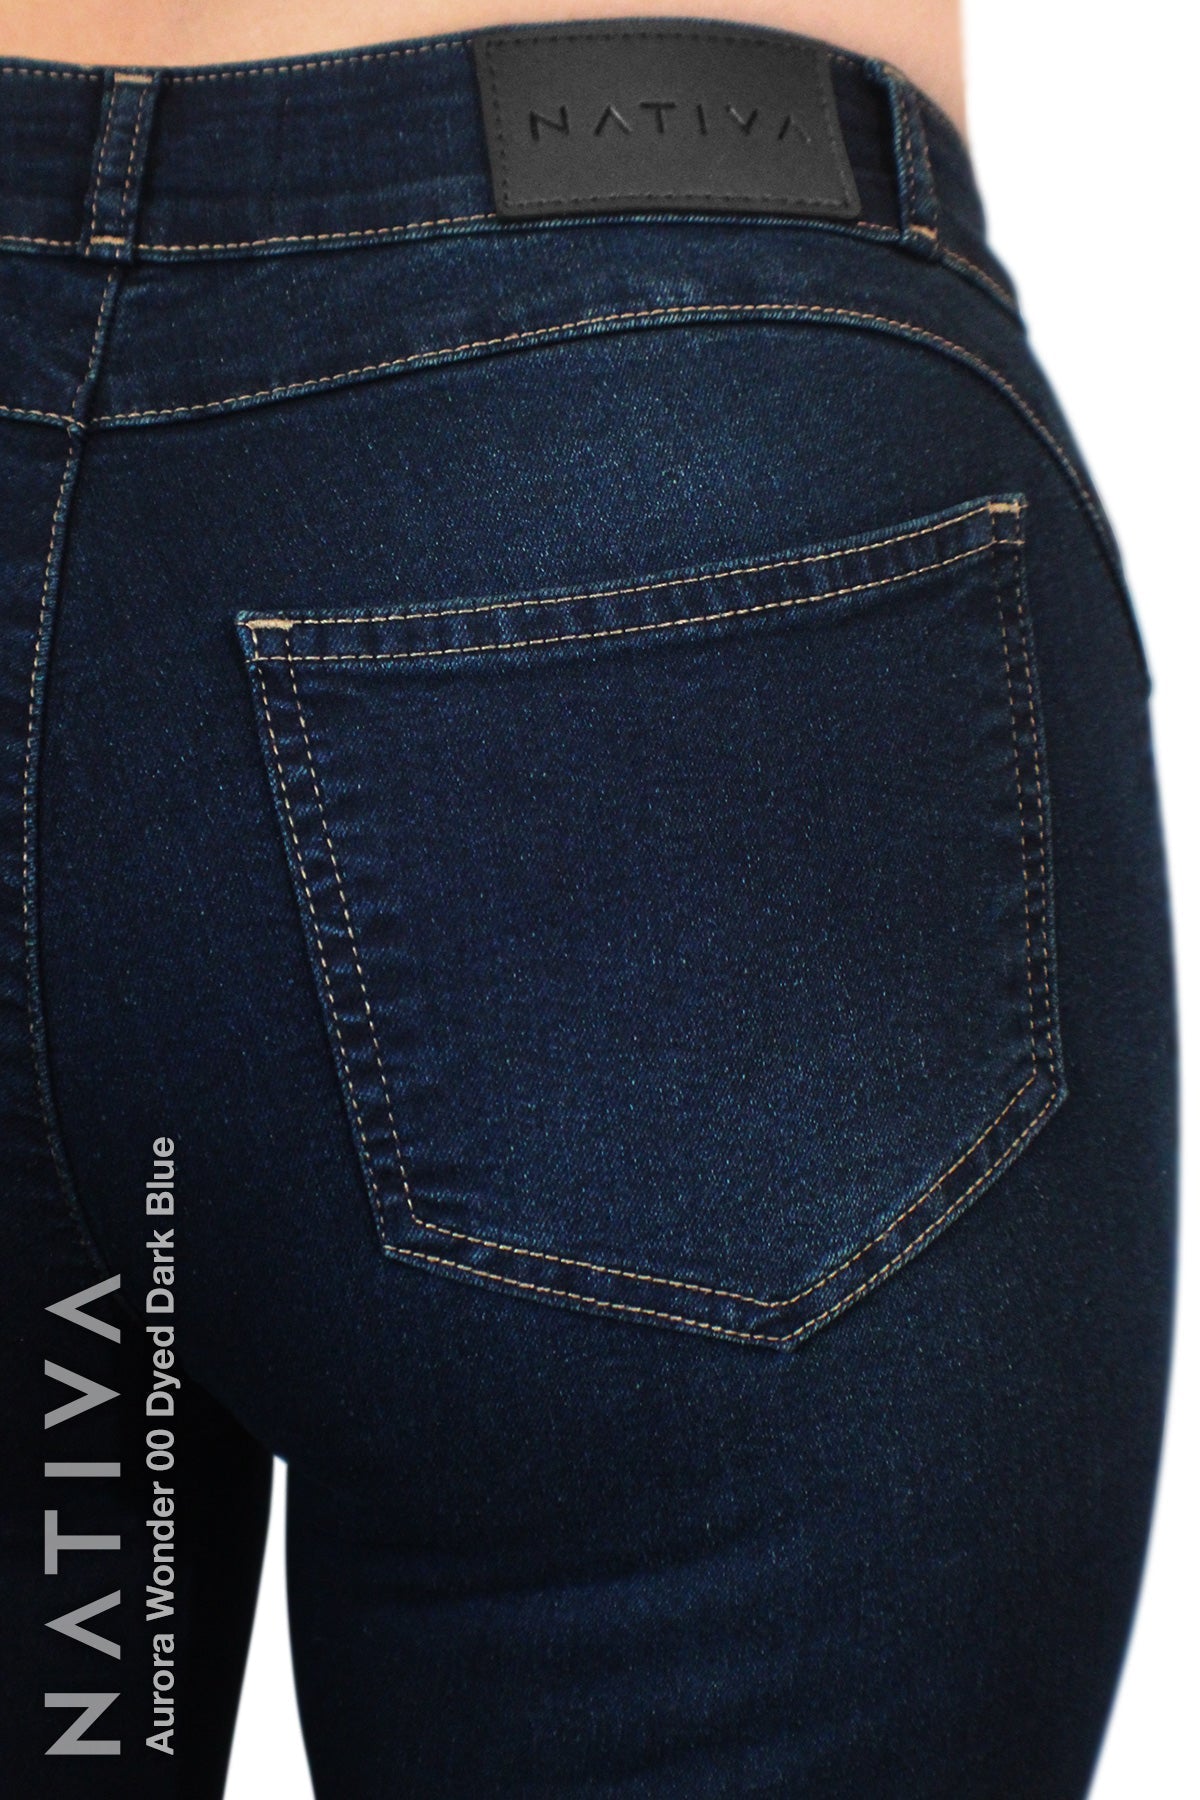 NATIVA, STRETCH JEANS. AURORA DREAM 00 OCEAN BLUE, High Shaping Capacity,  Ultra Comfy, 24-Hour Wear, Mid-Waisted Super Skinny Jeans